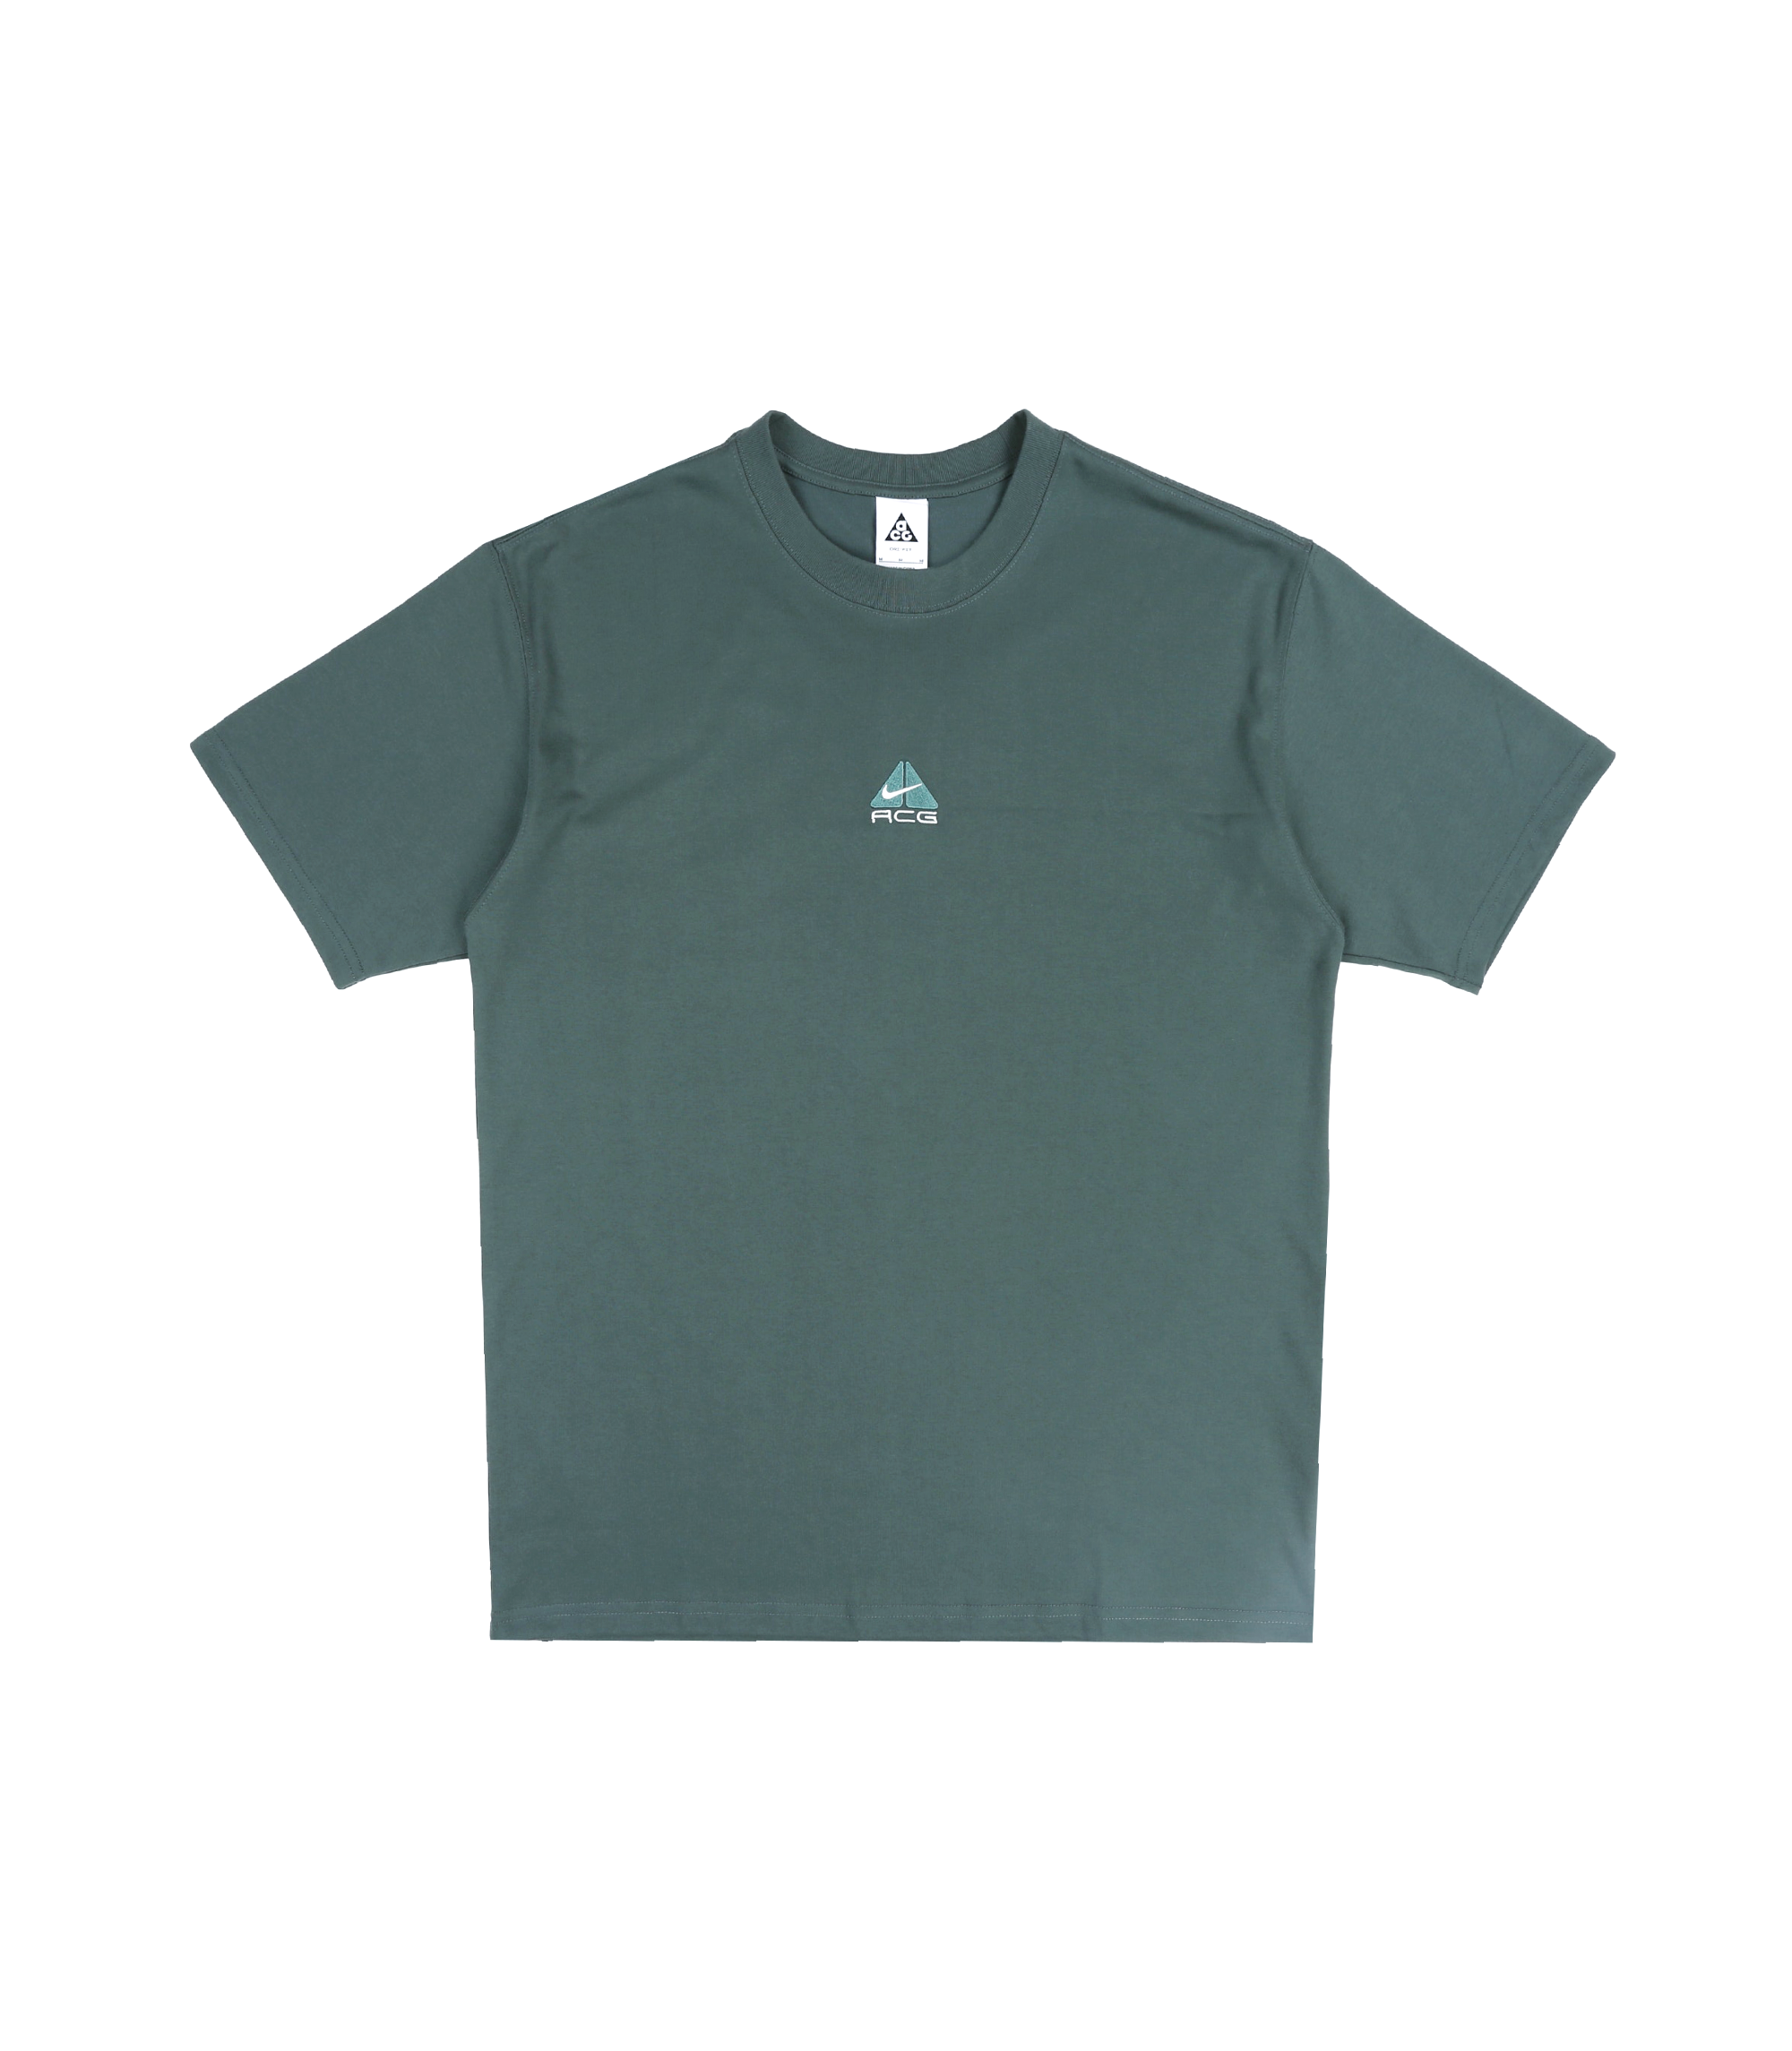 Lungs T-shirt - Vintage Green